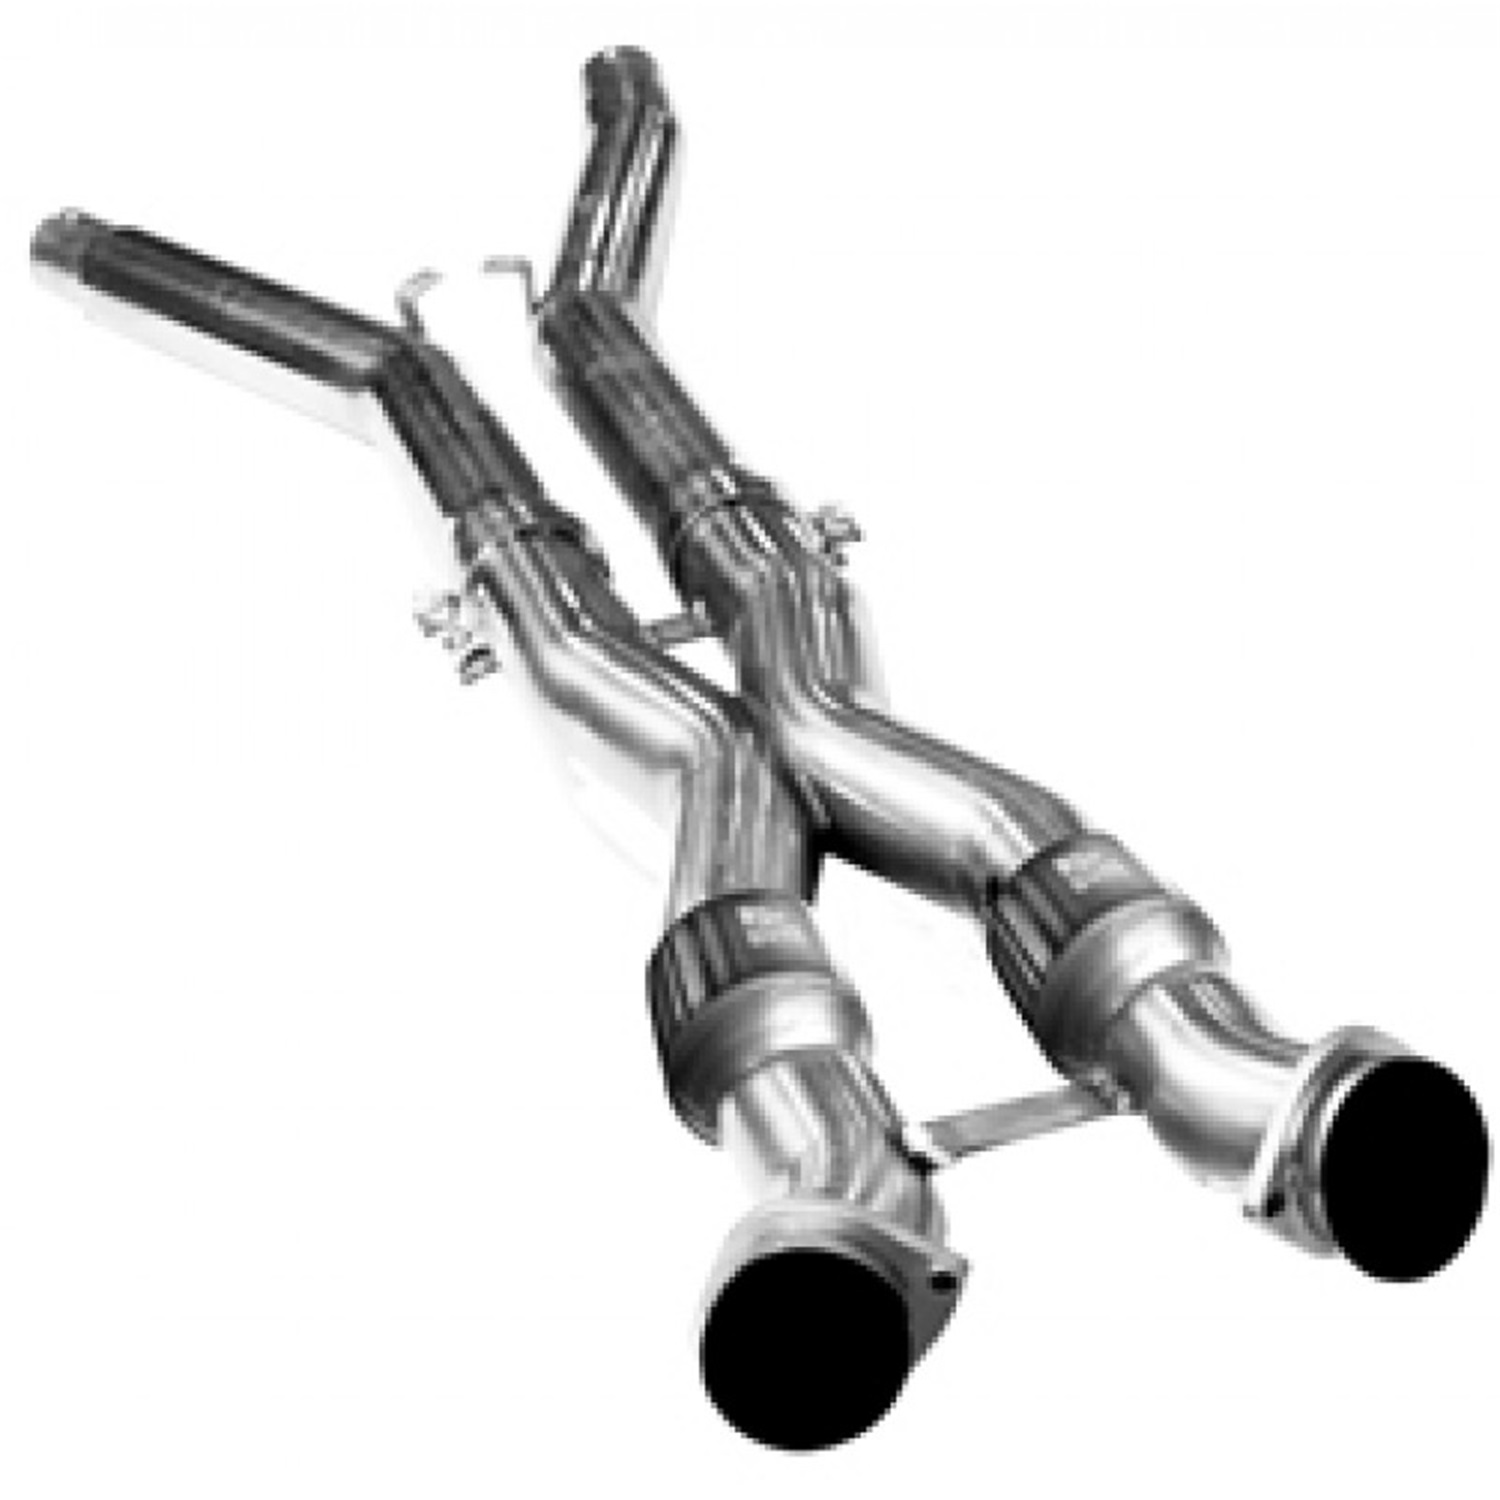 GREEN Catted X-Pipe 3 x 3" Connects To 2.5" OEM Style Exhaust Incl. 3 x 2.5" Mid-Pipes 05-08 Corvette C6 LS2/LS3 6.0L/6.2L